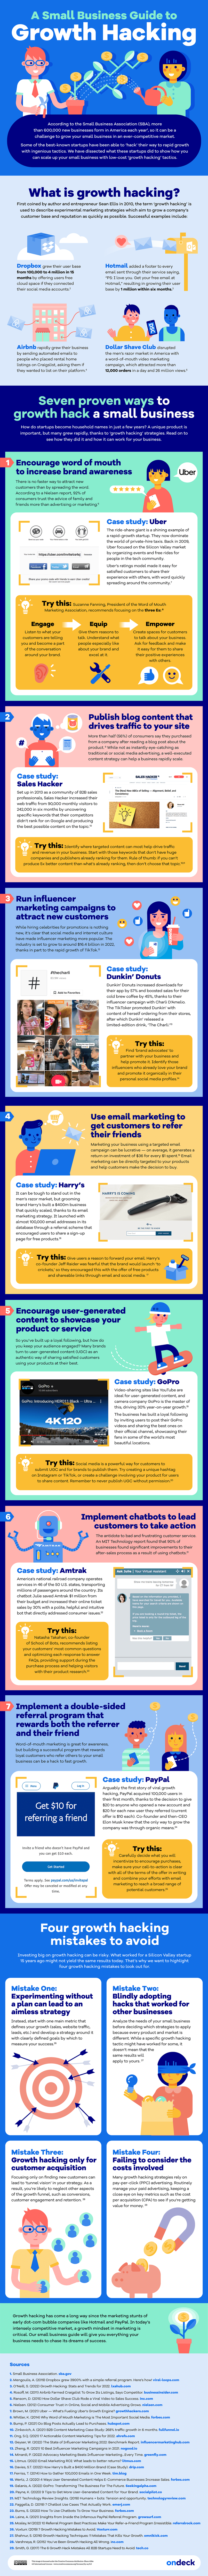 OnDeck infographic on tips small businesses can use to hack growth